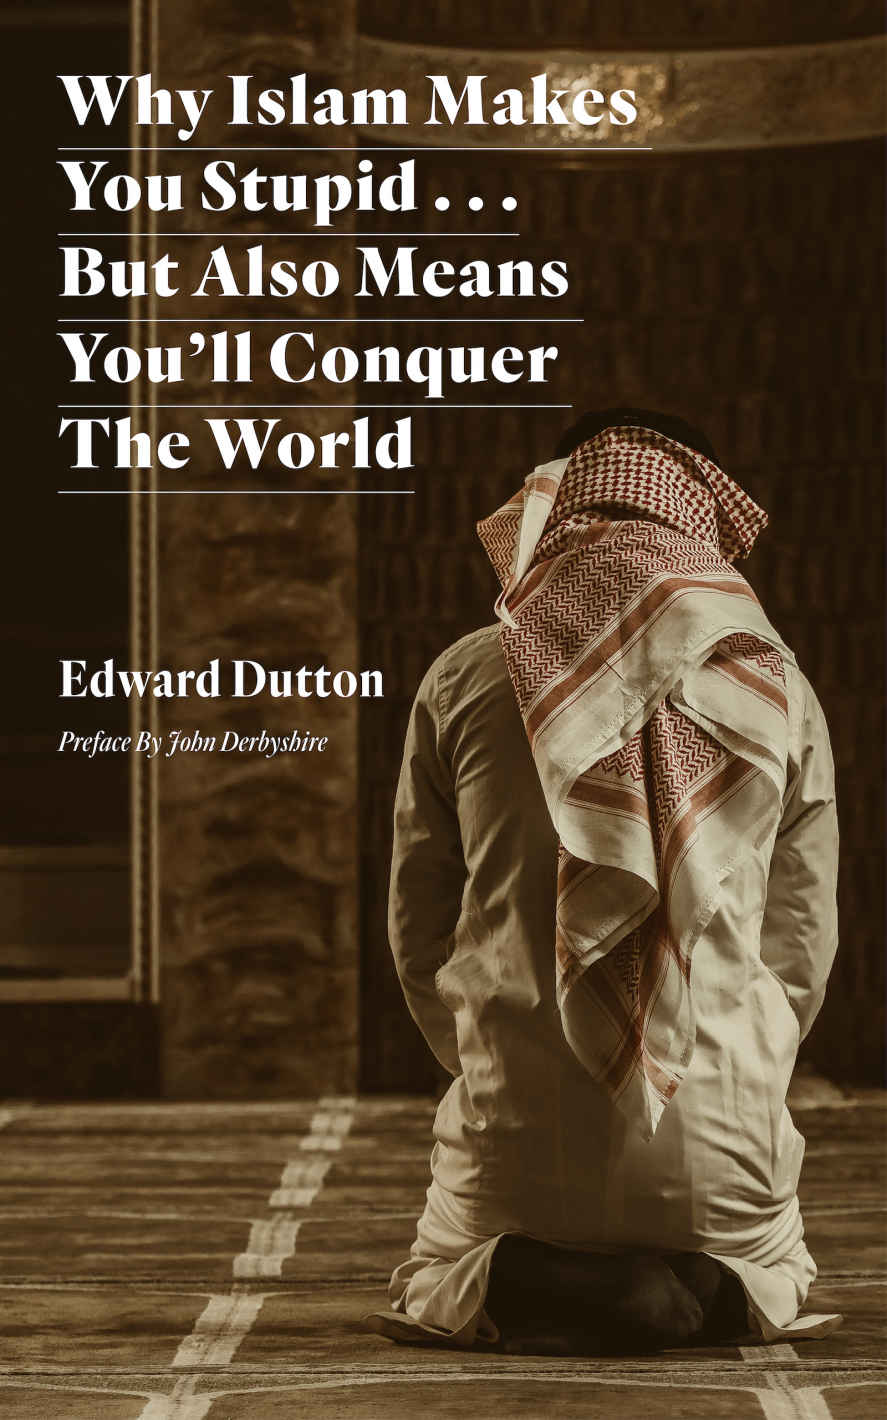 Why Islam Makes You Stupid . . . But Also Means You'll Conquer The World